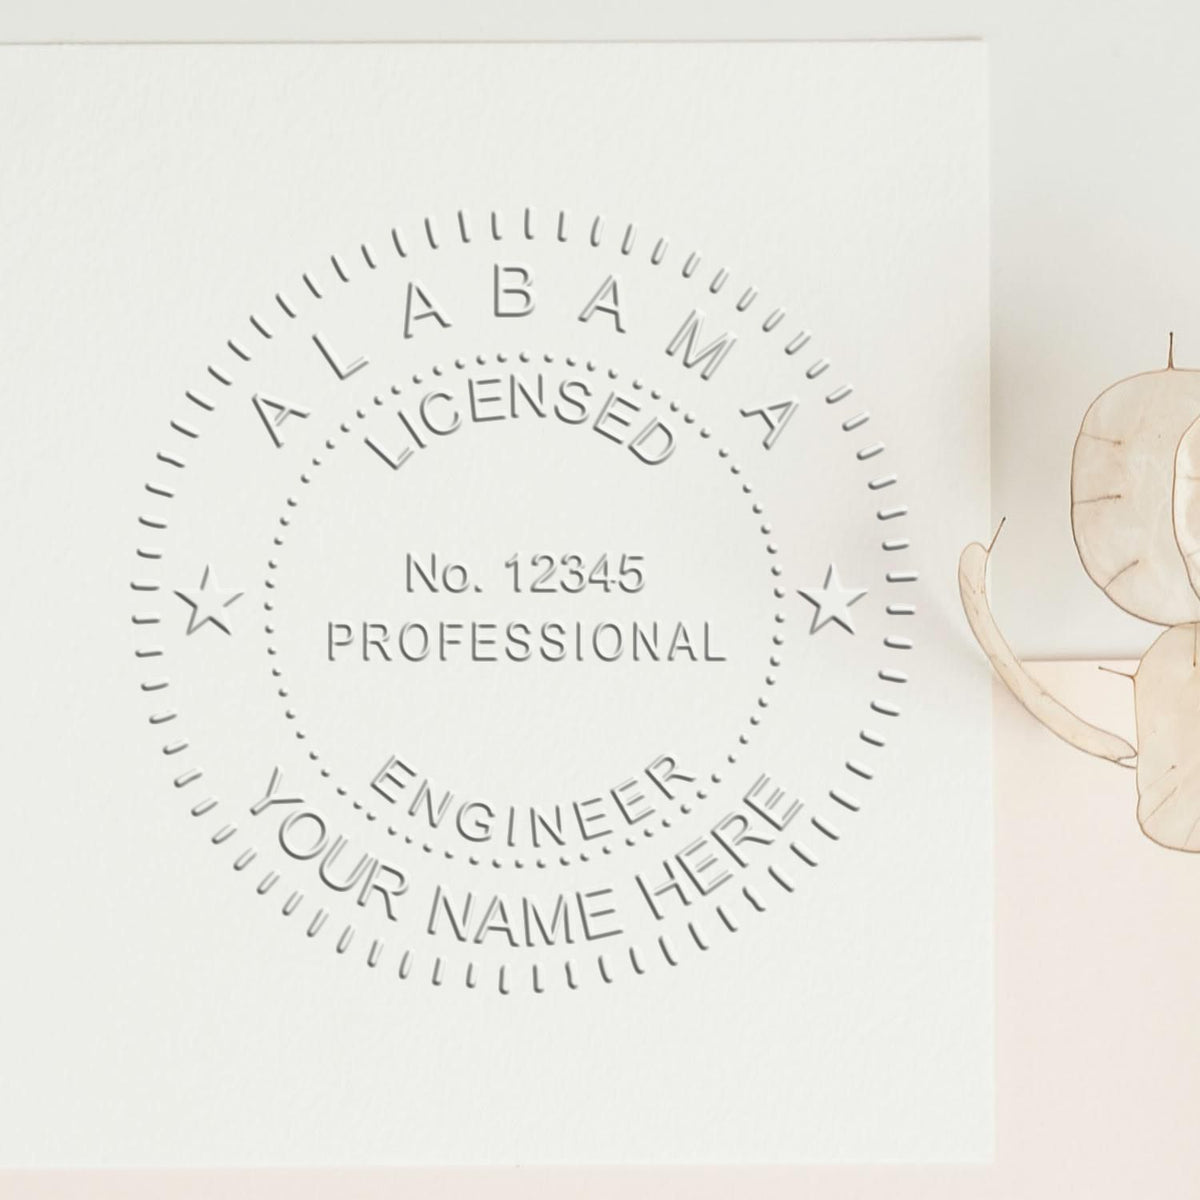 A photograph of the Alabama Engineer Desk Seal stamp impression reveals a vivid, professional image of the on paper.